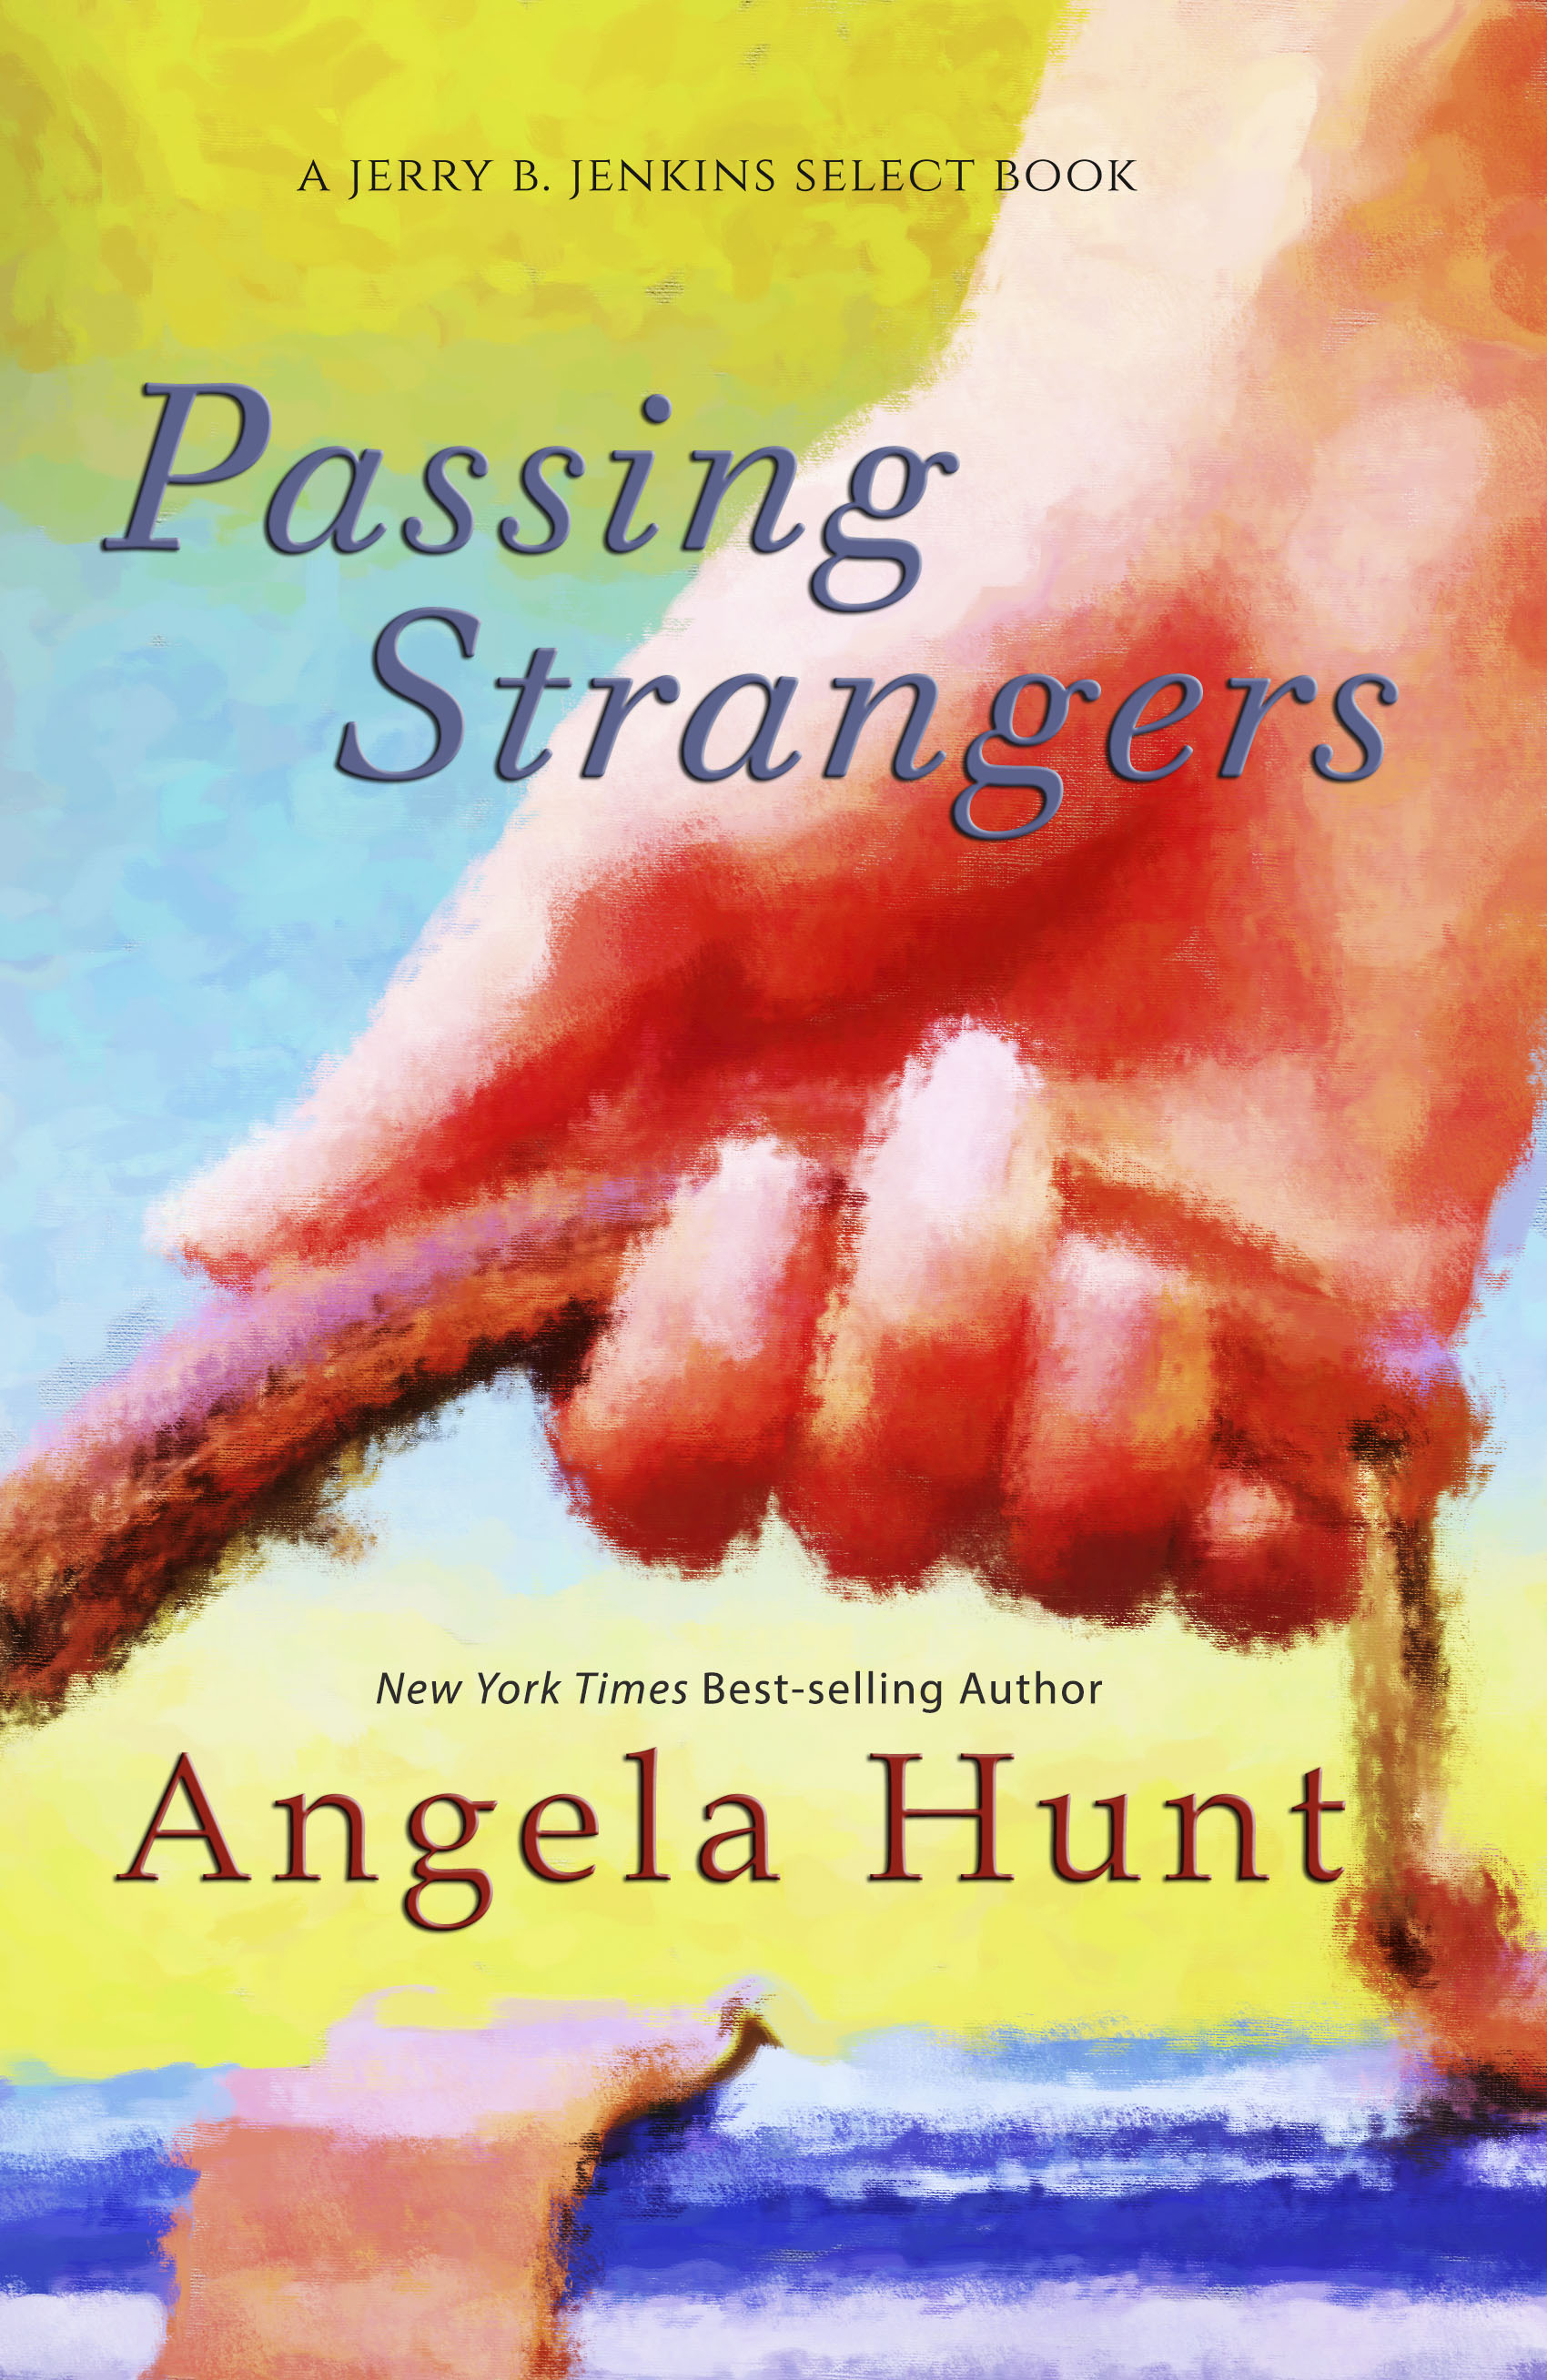 We’re Giving Away Five Audio Books of PASSING STRANGERS!